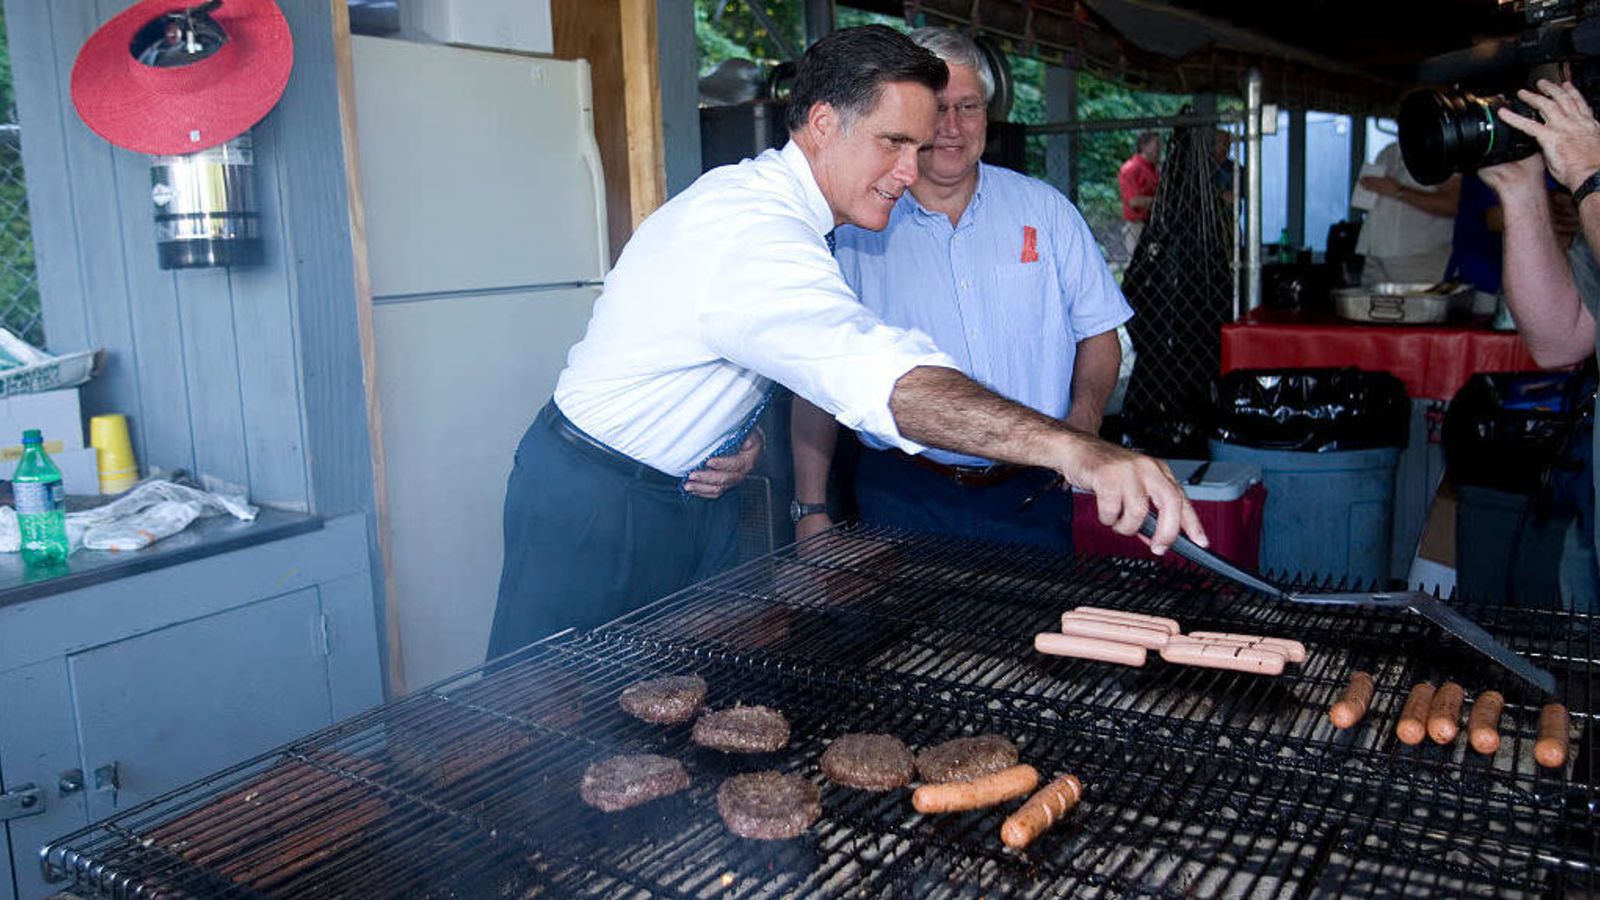 Real Human Being Mitt Romney Wants To Remind You That Hot Dog Is